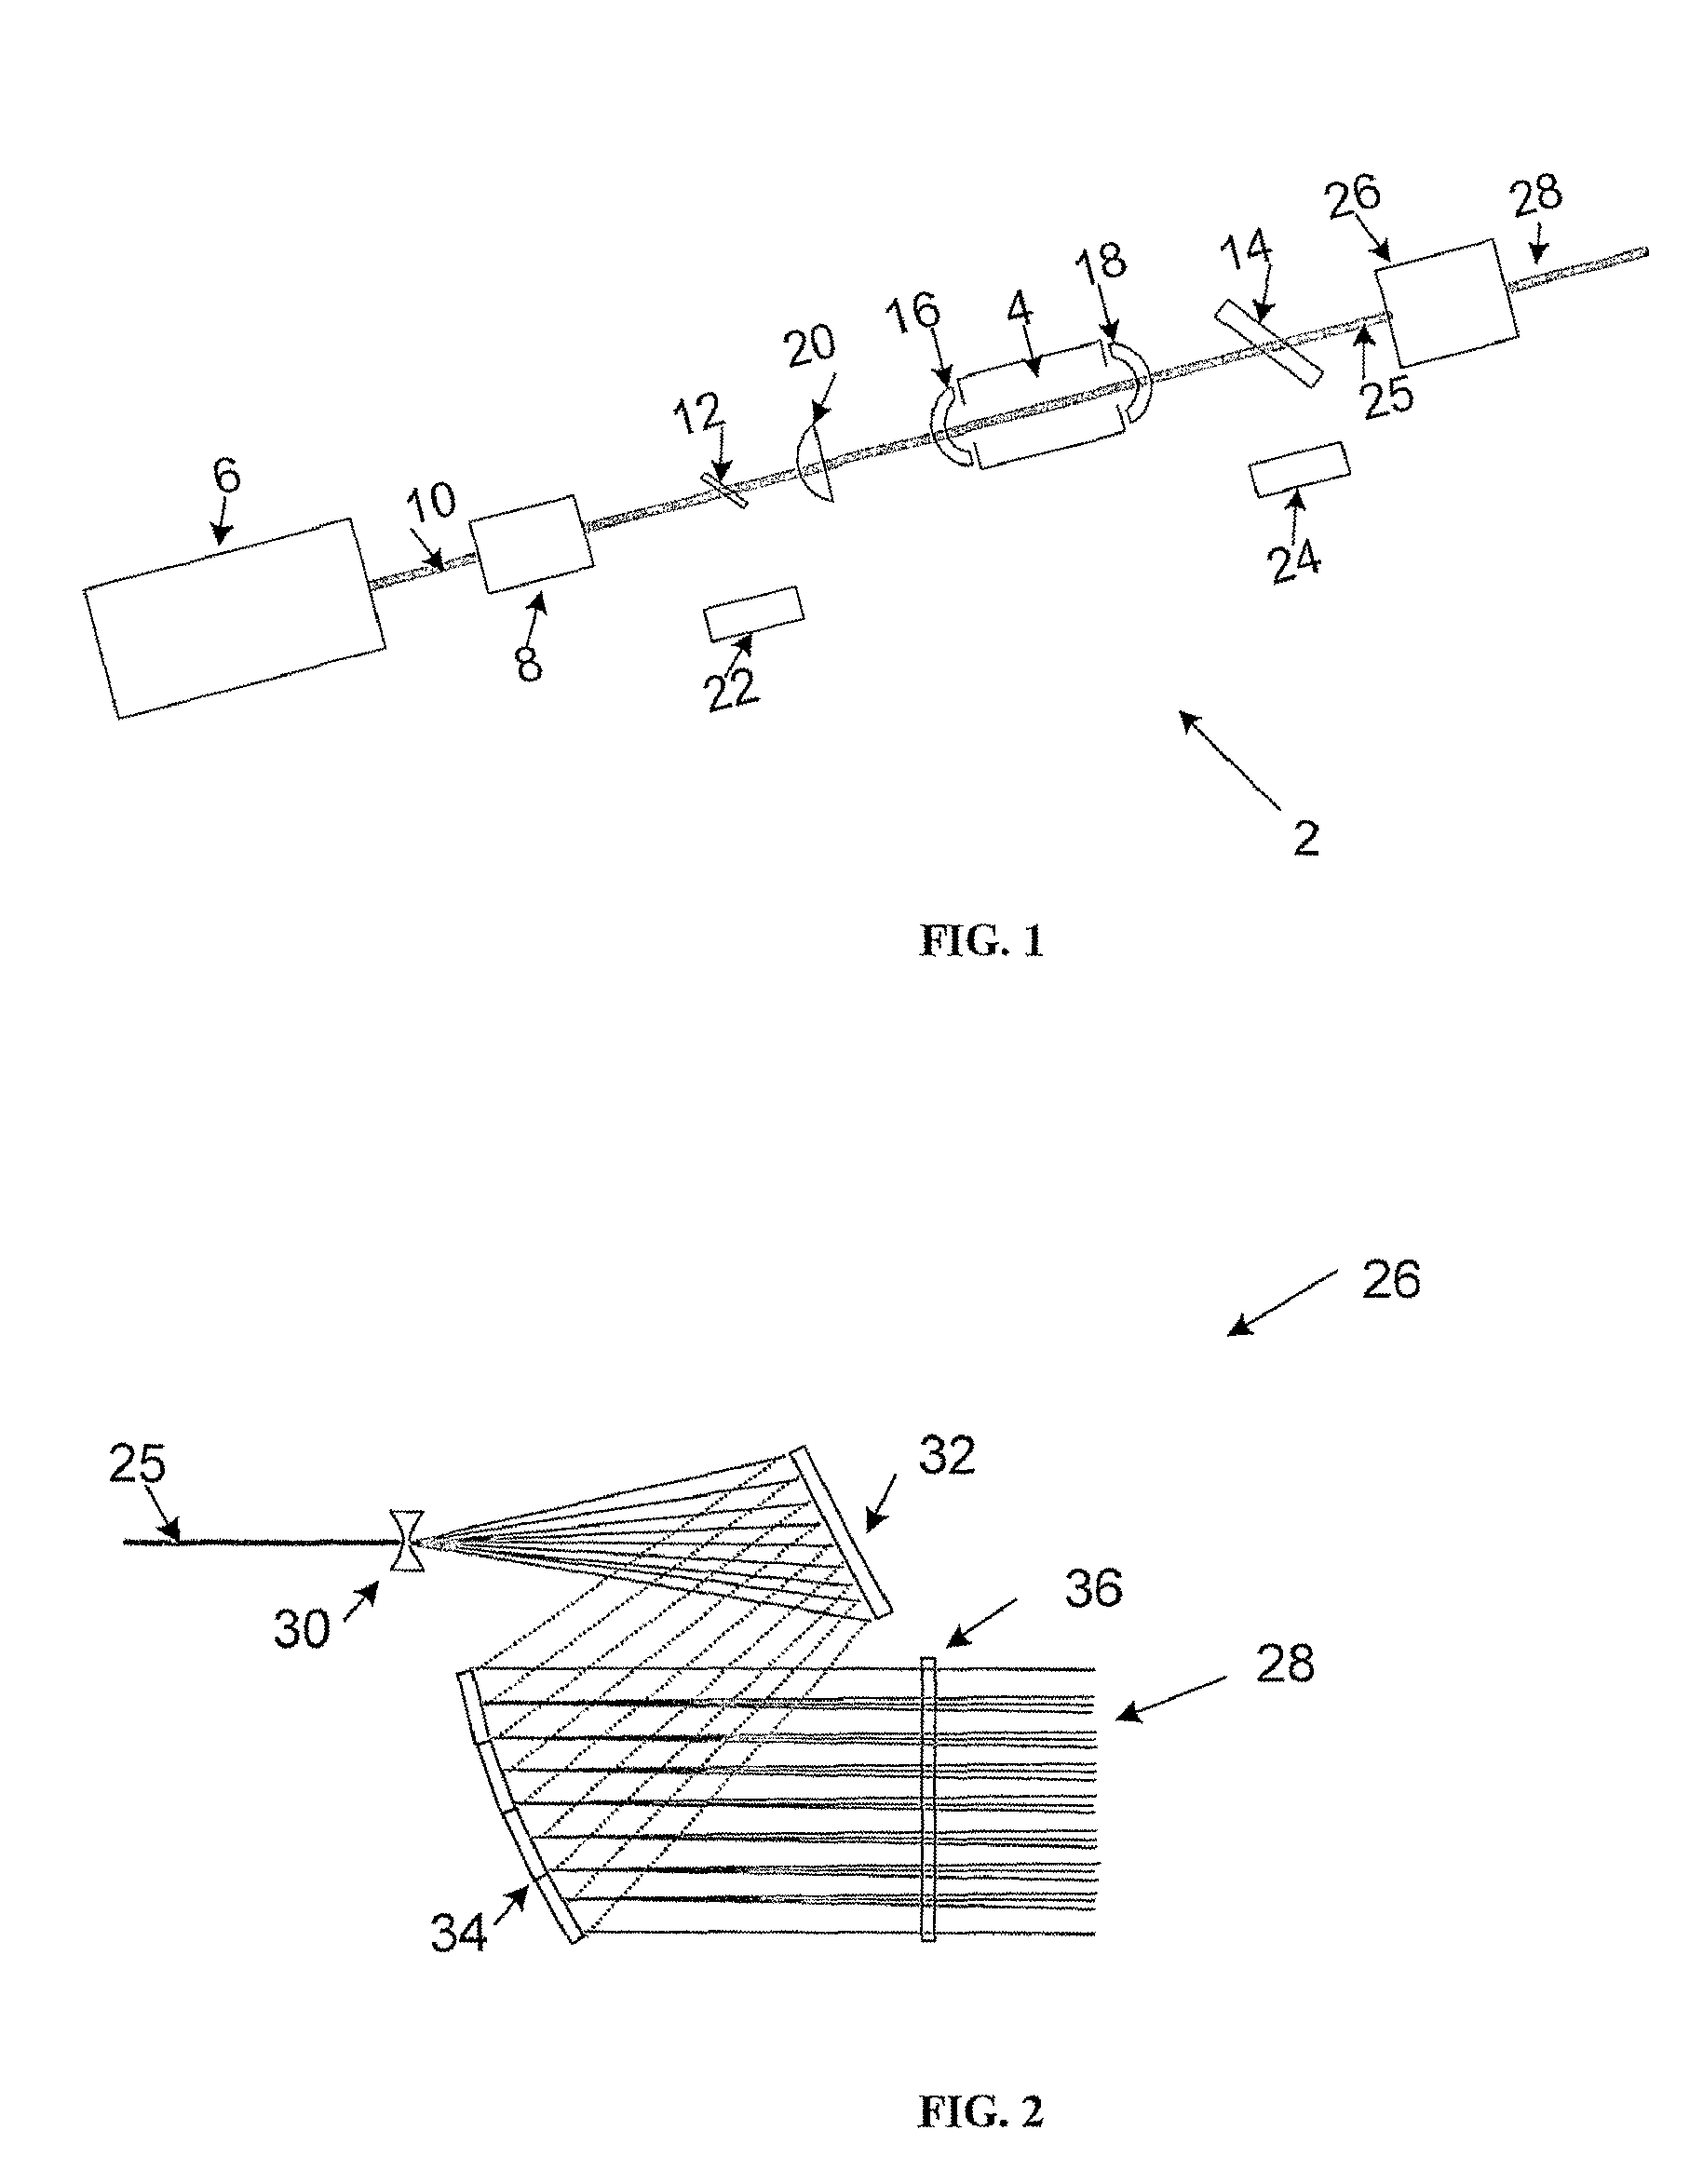 Apparatus for use in operator training with, and the testing and evaluation of, infrared sensors which are for missile detection